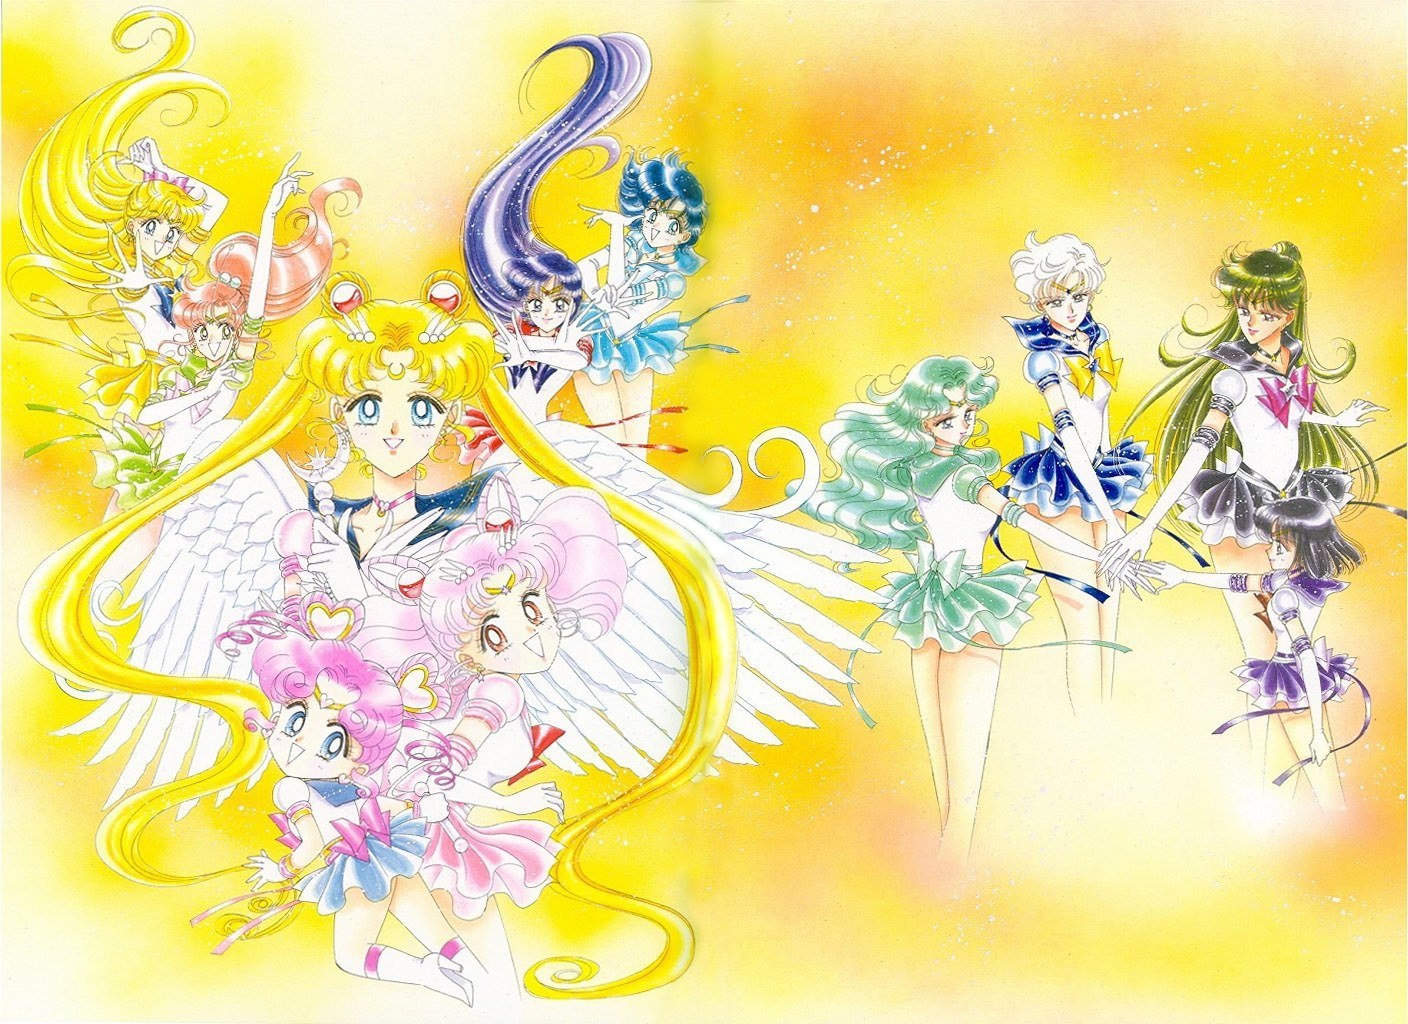 Sailor Moon Original Picture Collection Vol V Sailormusic Net Pretty guardian sailor moon eternal official visual book unboxinghi everyone!how are you doing?starting march with great feelings of a good things.even. sailor moon original picture collection